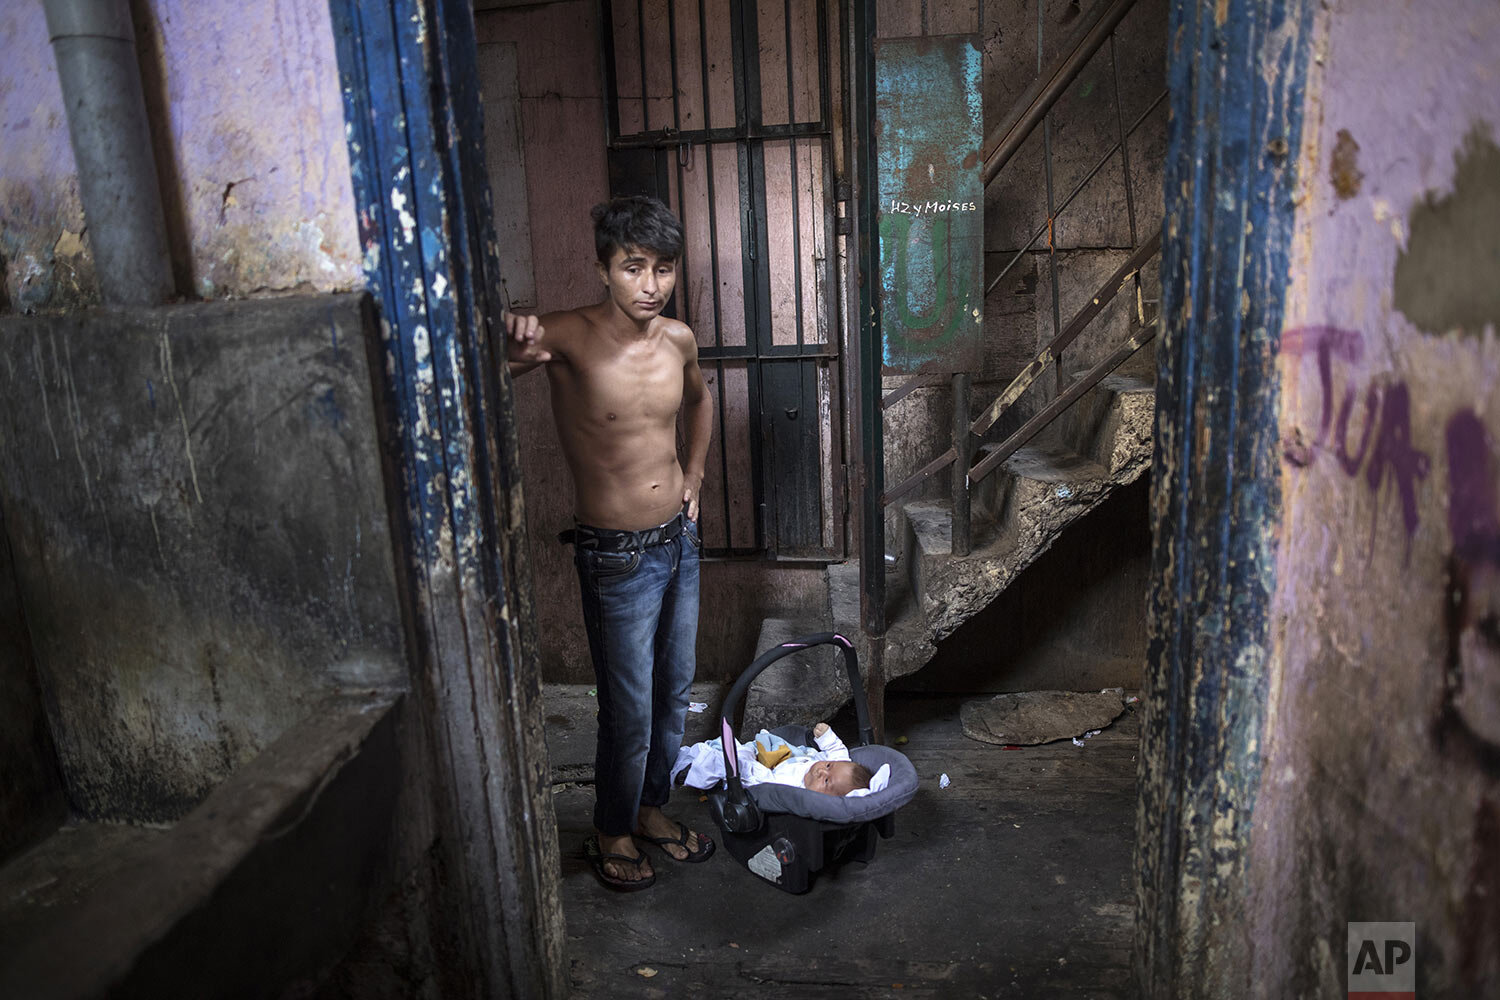  In this April 3, 2020 photo, ex-convict Julio Ramos stands next to his 3-month-old son Jose, inside the deteriorating building where he lives nicknamed “Luriganchito,” after the country’s most populous prison, in Lima, Peru. “I do not want my childr